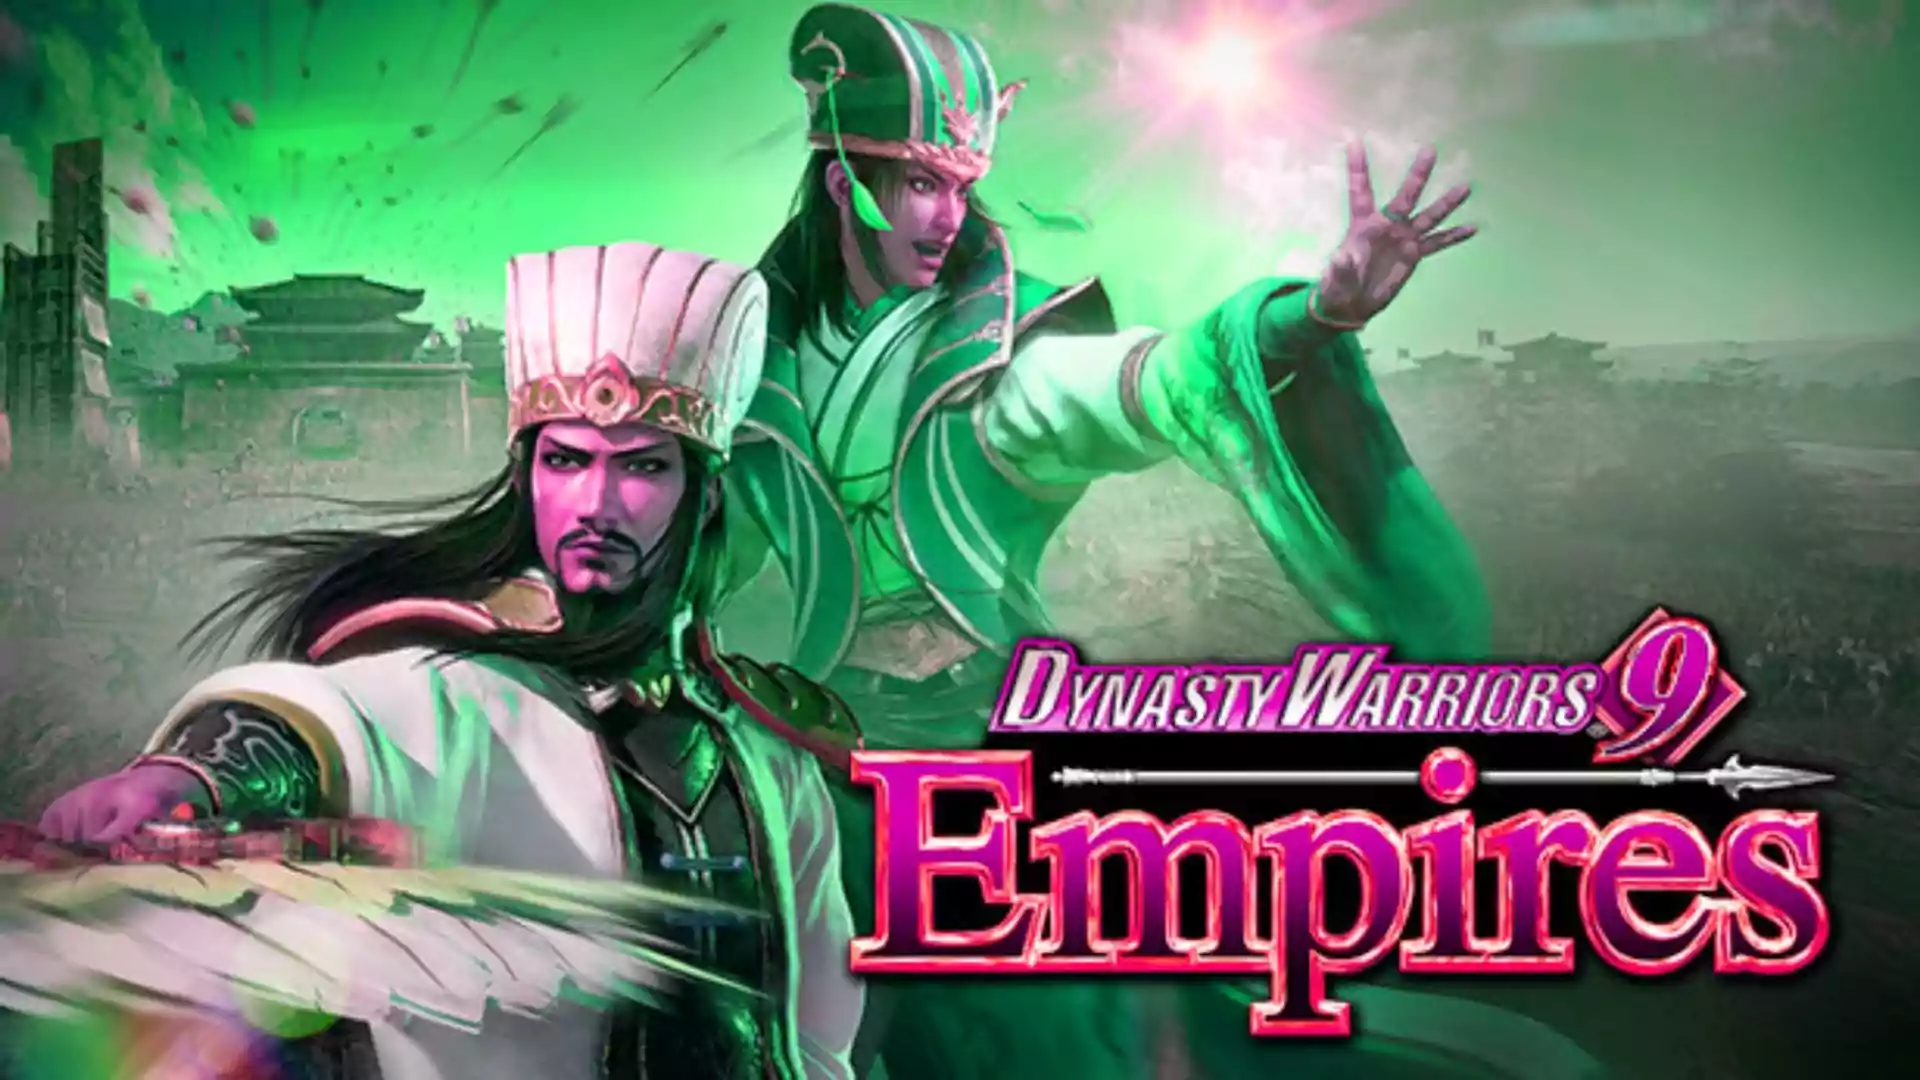 Dynasty Warriors 9 Empires Parents Guide and age rating